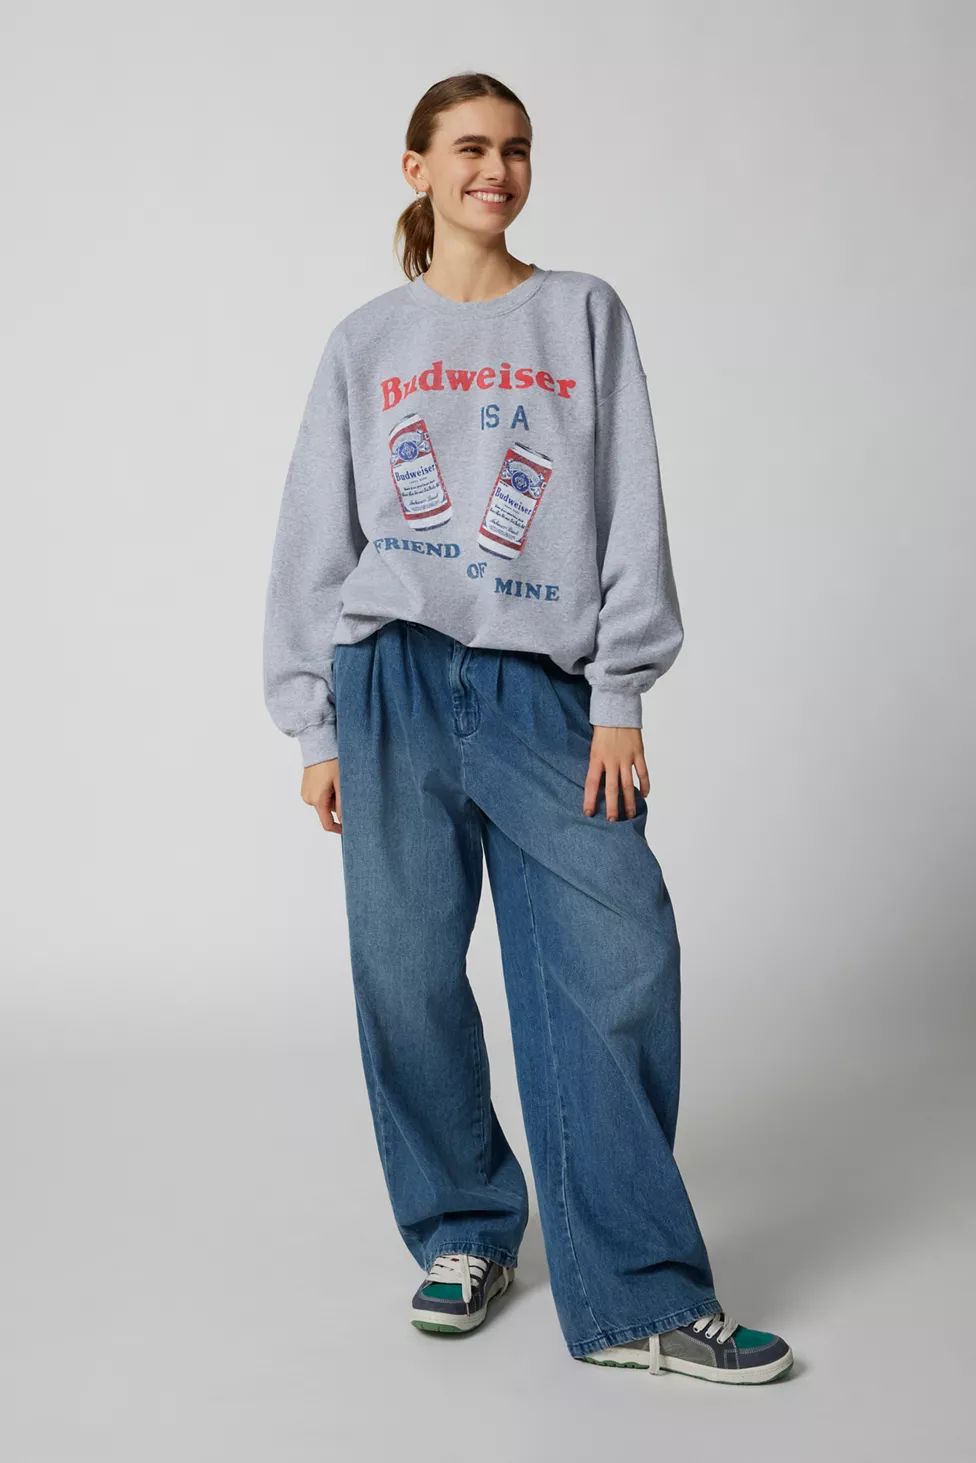 Budweiser Is A Friend Of Mine Graphic Sweatshirt | Urban Outfitters (US and RoW)